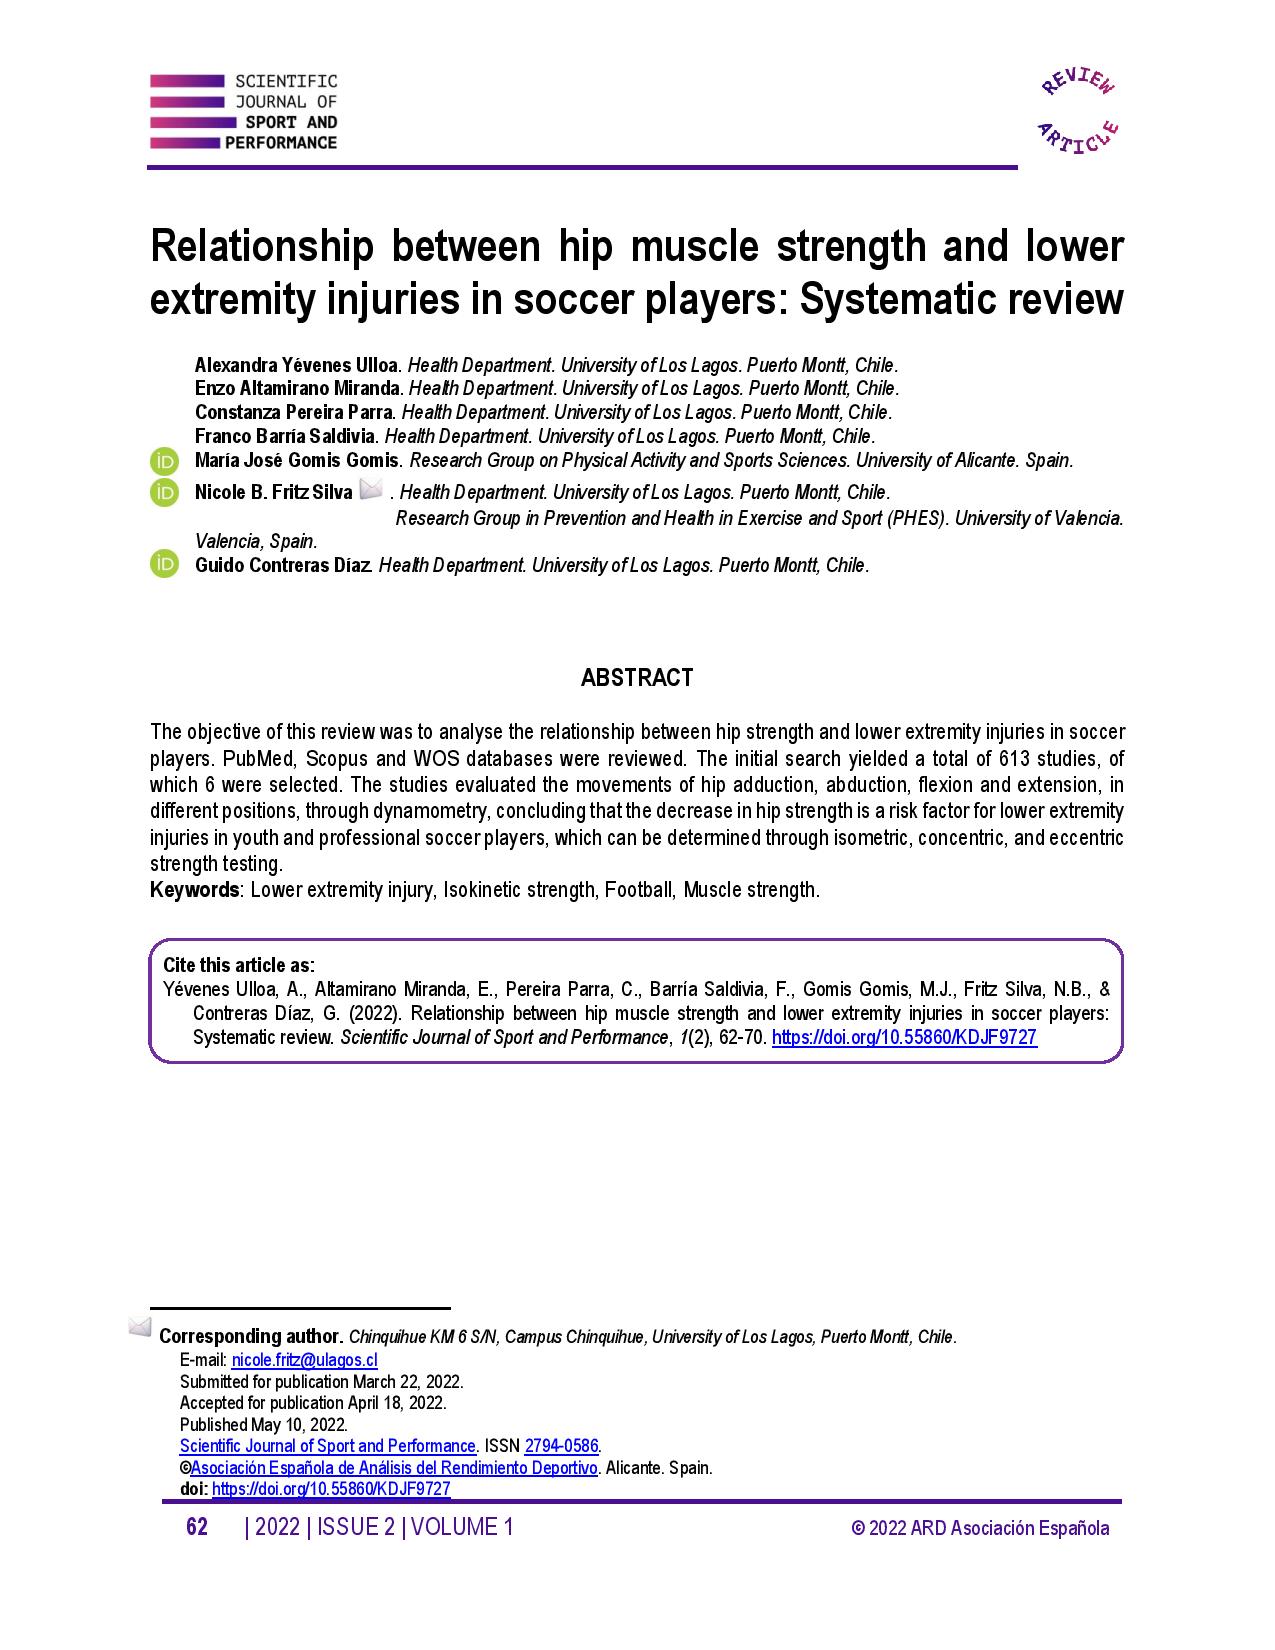 Relationship between hip muscle strength and lower extremity injuries in soccer players: Systematic review